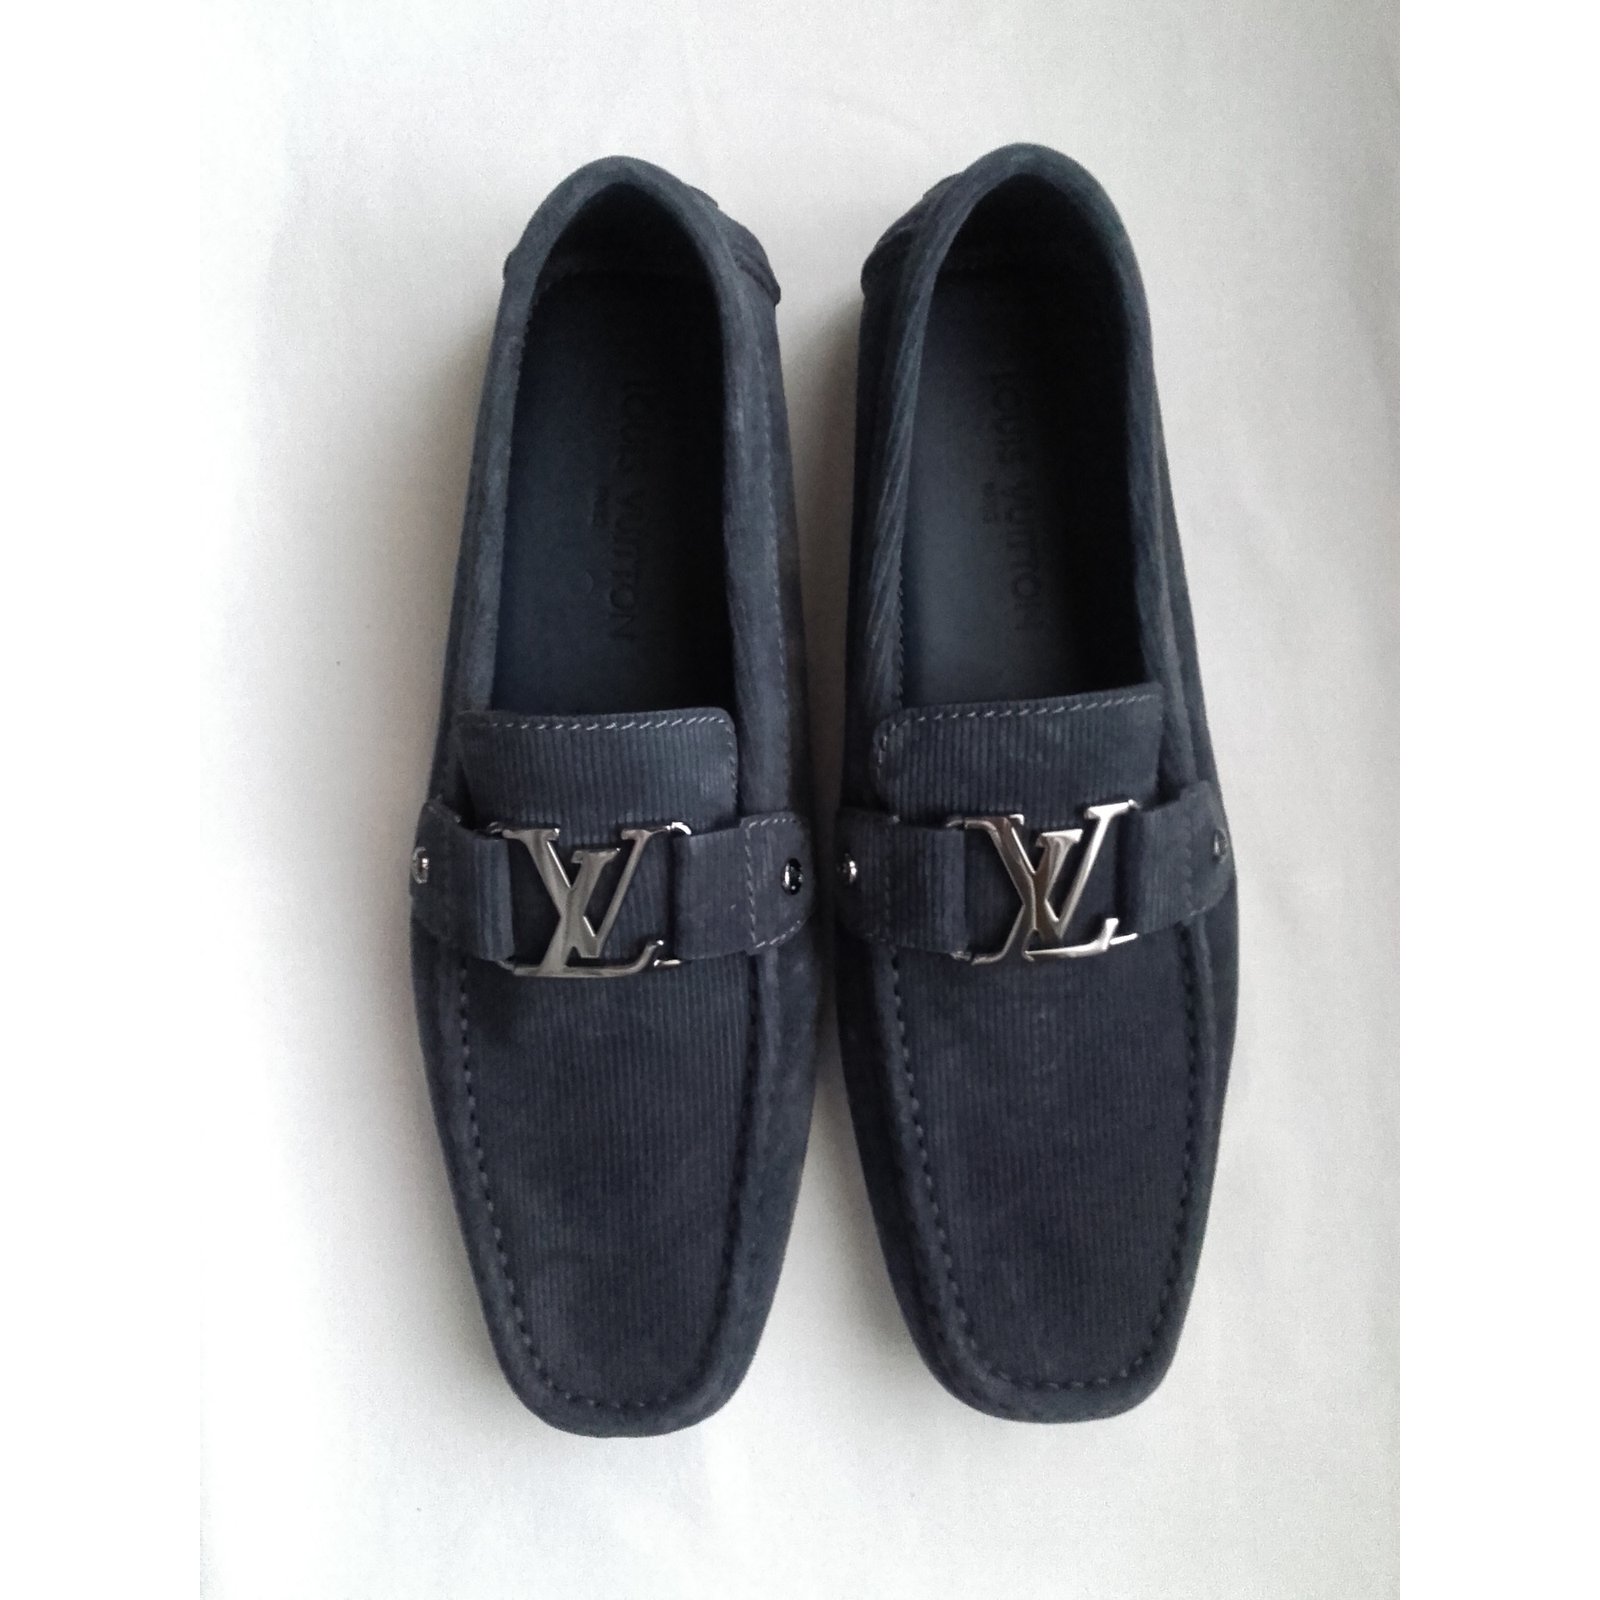 Louis Vuitton Slip Ons for Sale in Merced, CA - OfferUp